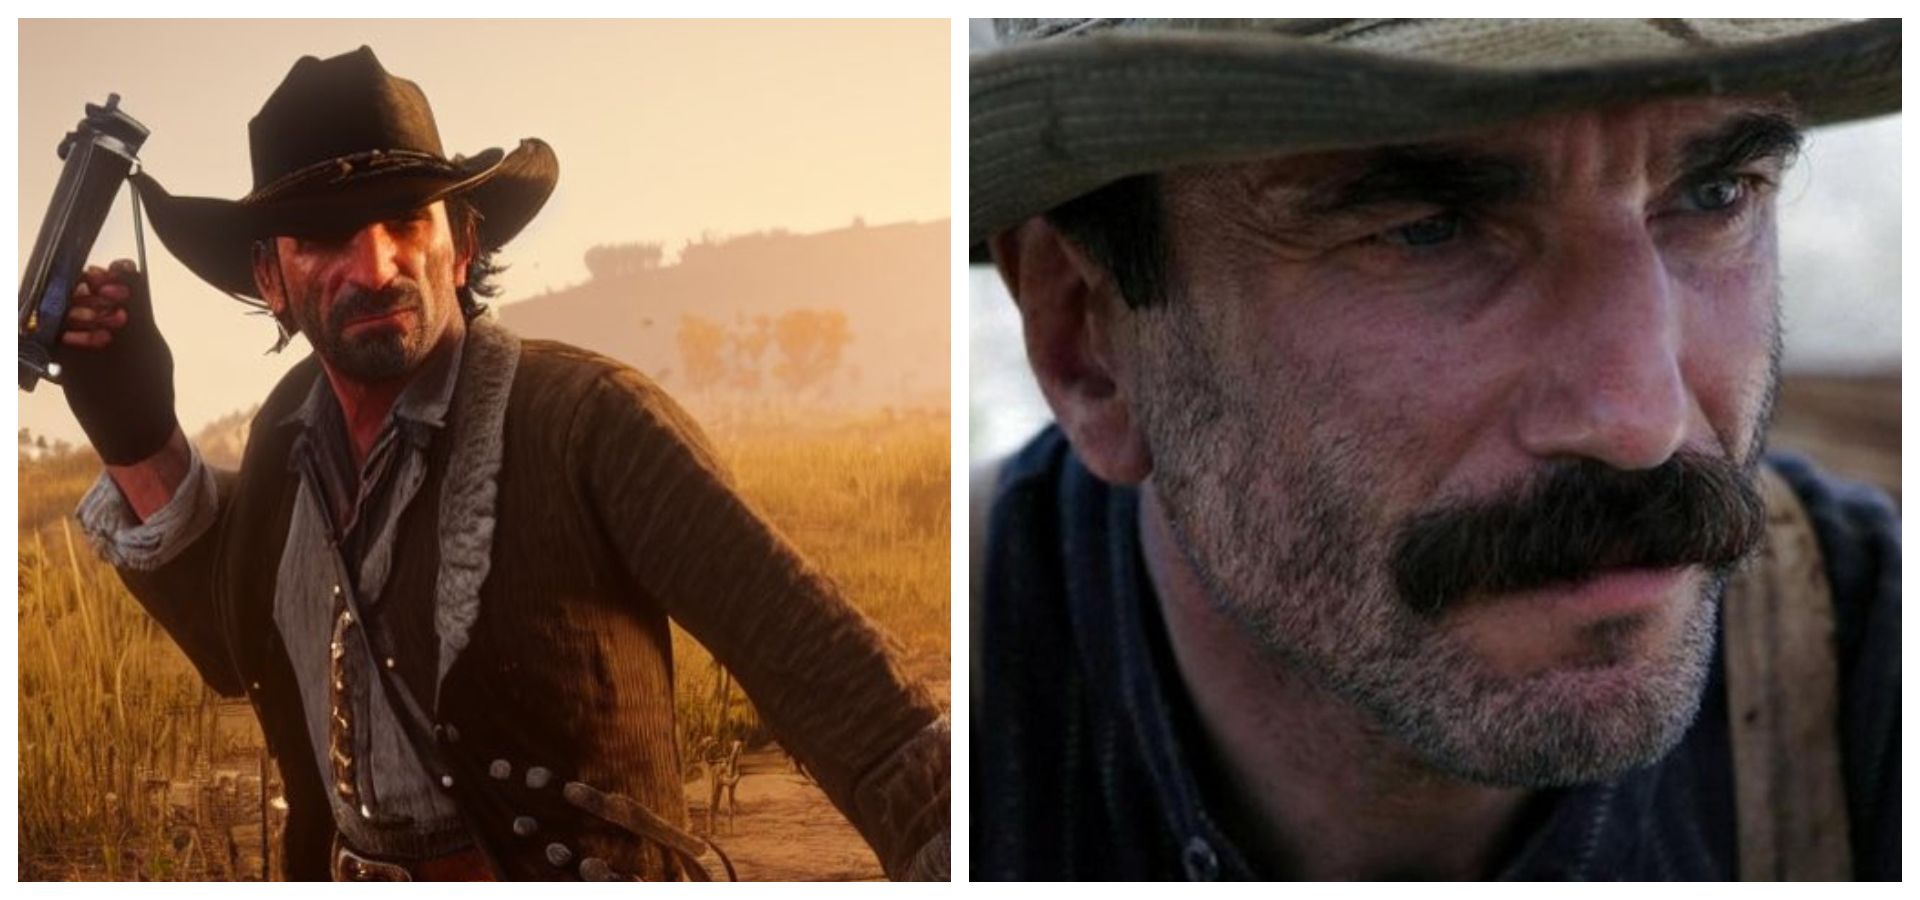 Rockstar Games' latest release had a great story, almost like a movie, so that brings to mind: Who would be cast as Red Dead Redemption 2 characters in a movie?